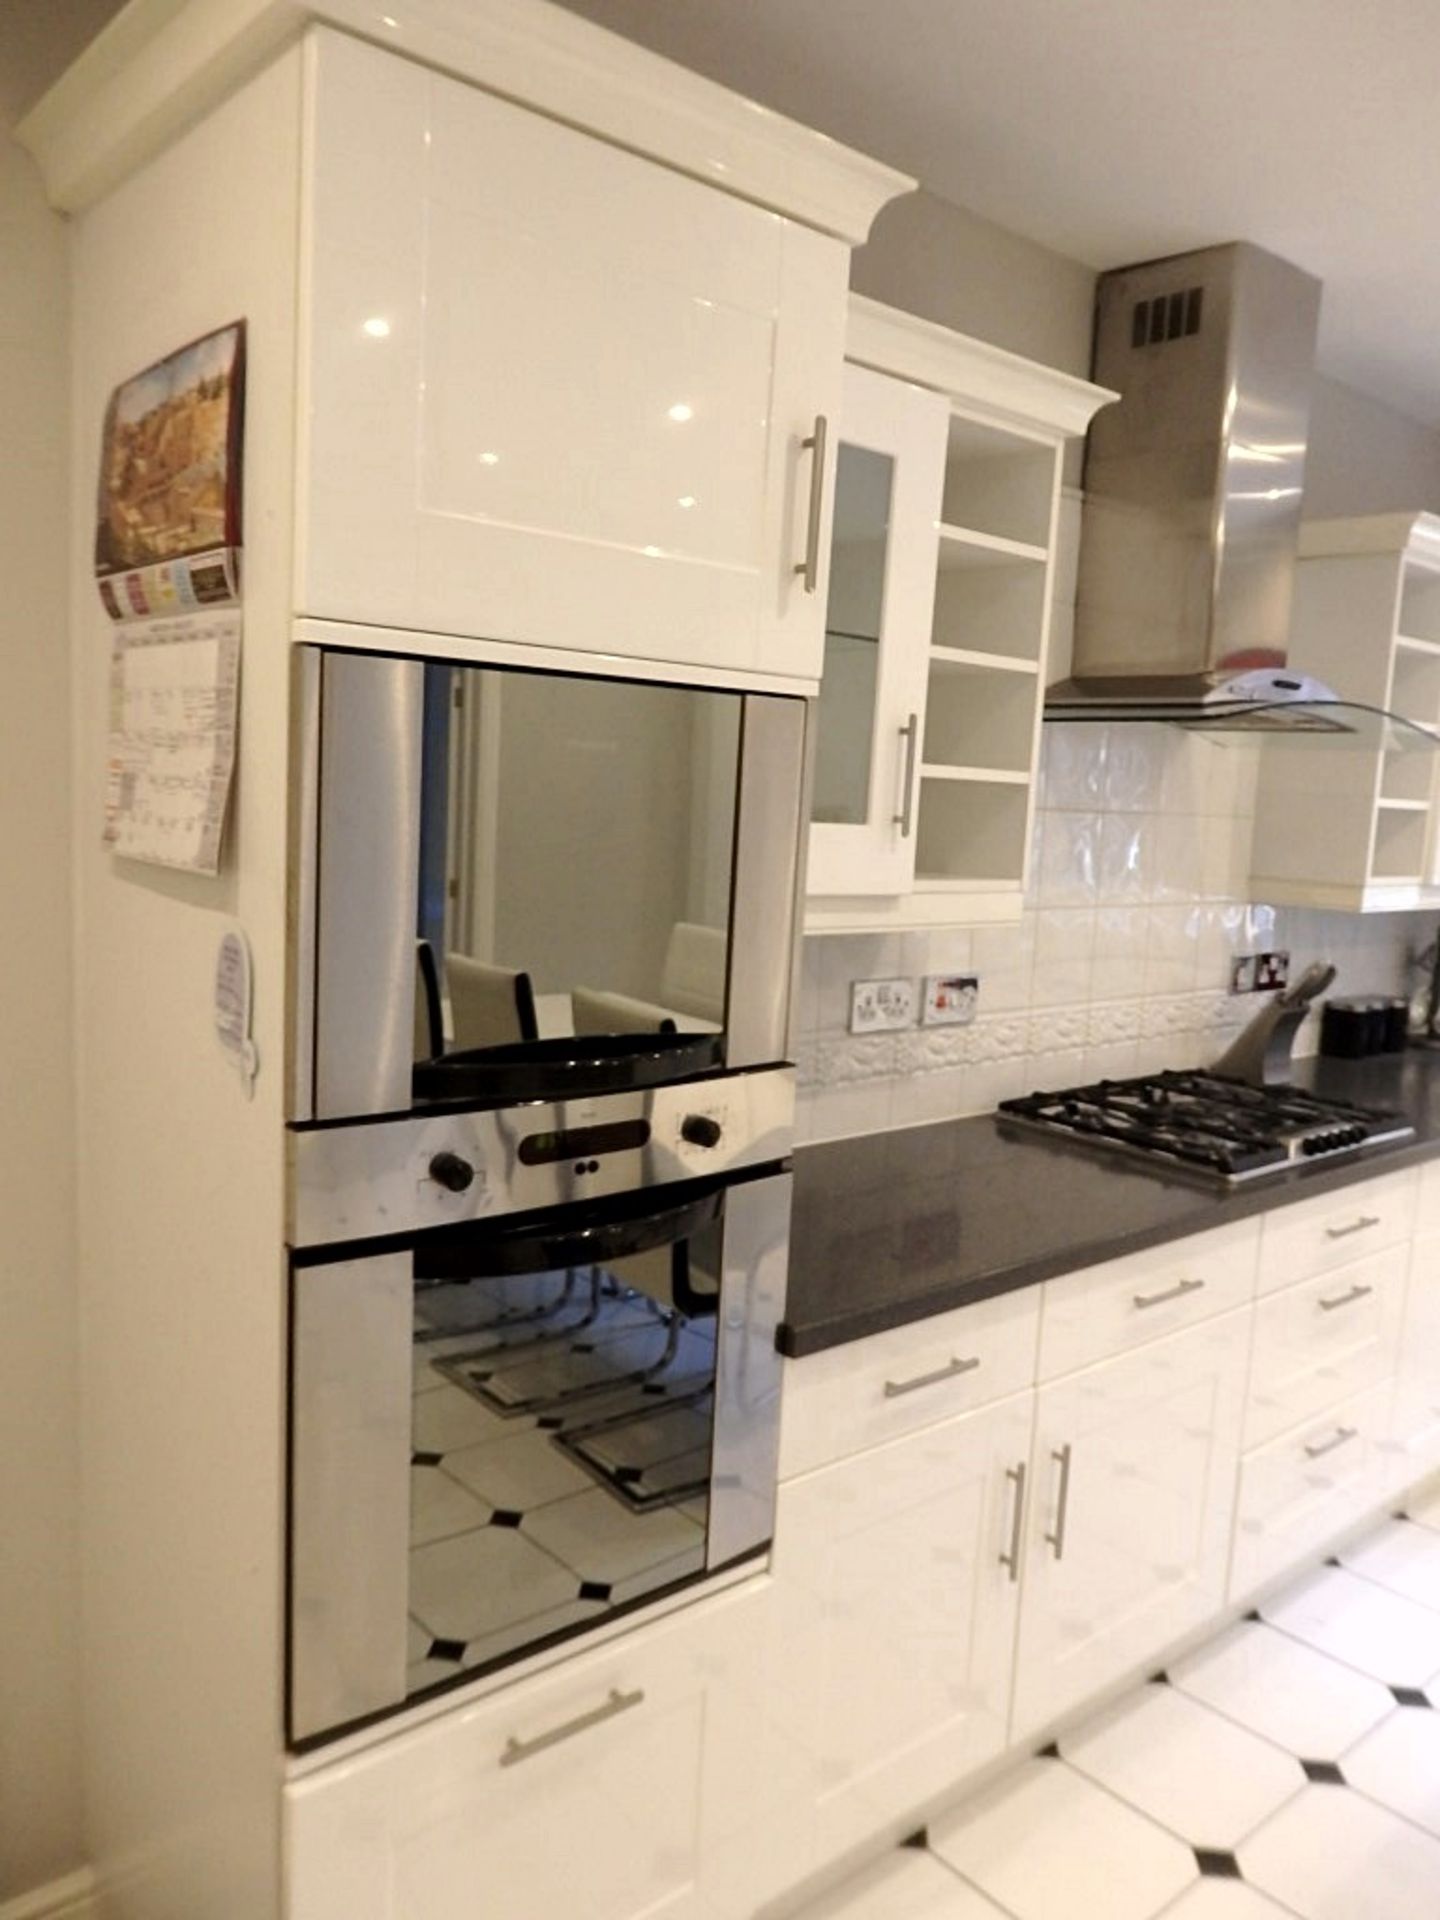 1 x White High Gloss Kitchen With Neff Integrated Dishwasher, 5 Ring Stainless Steel Hob, and - Image 20 of 20